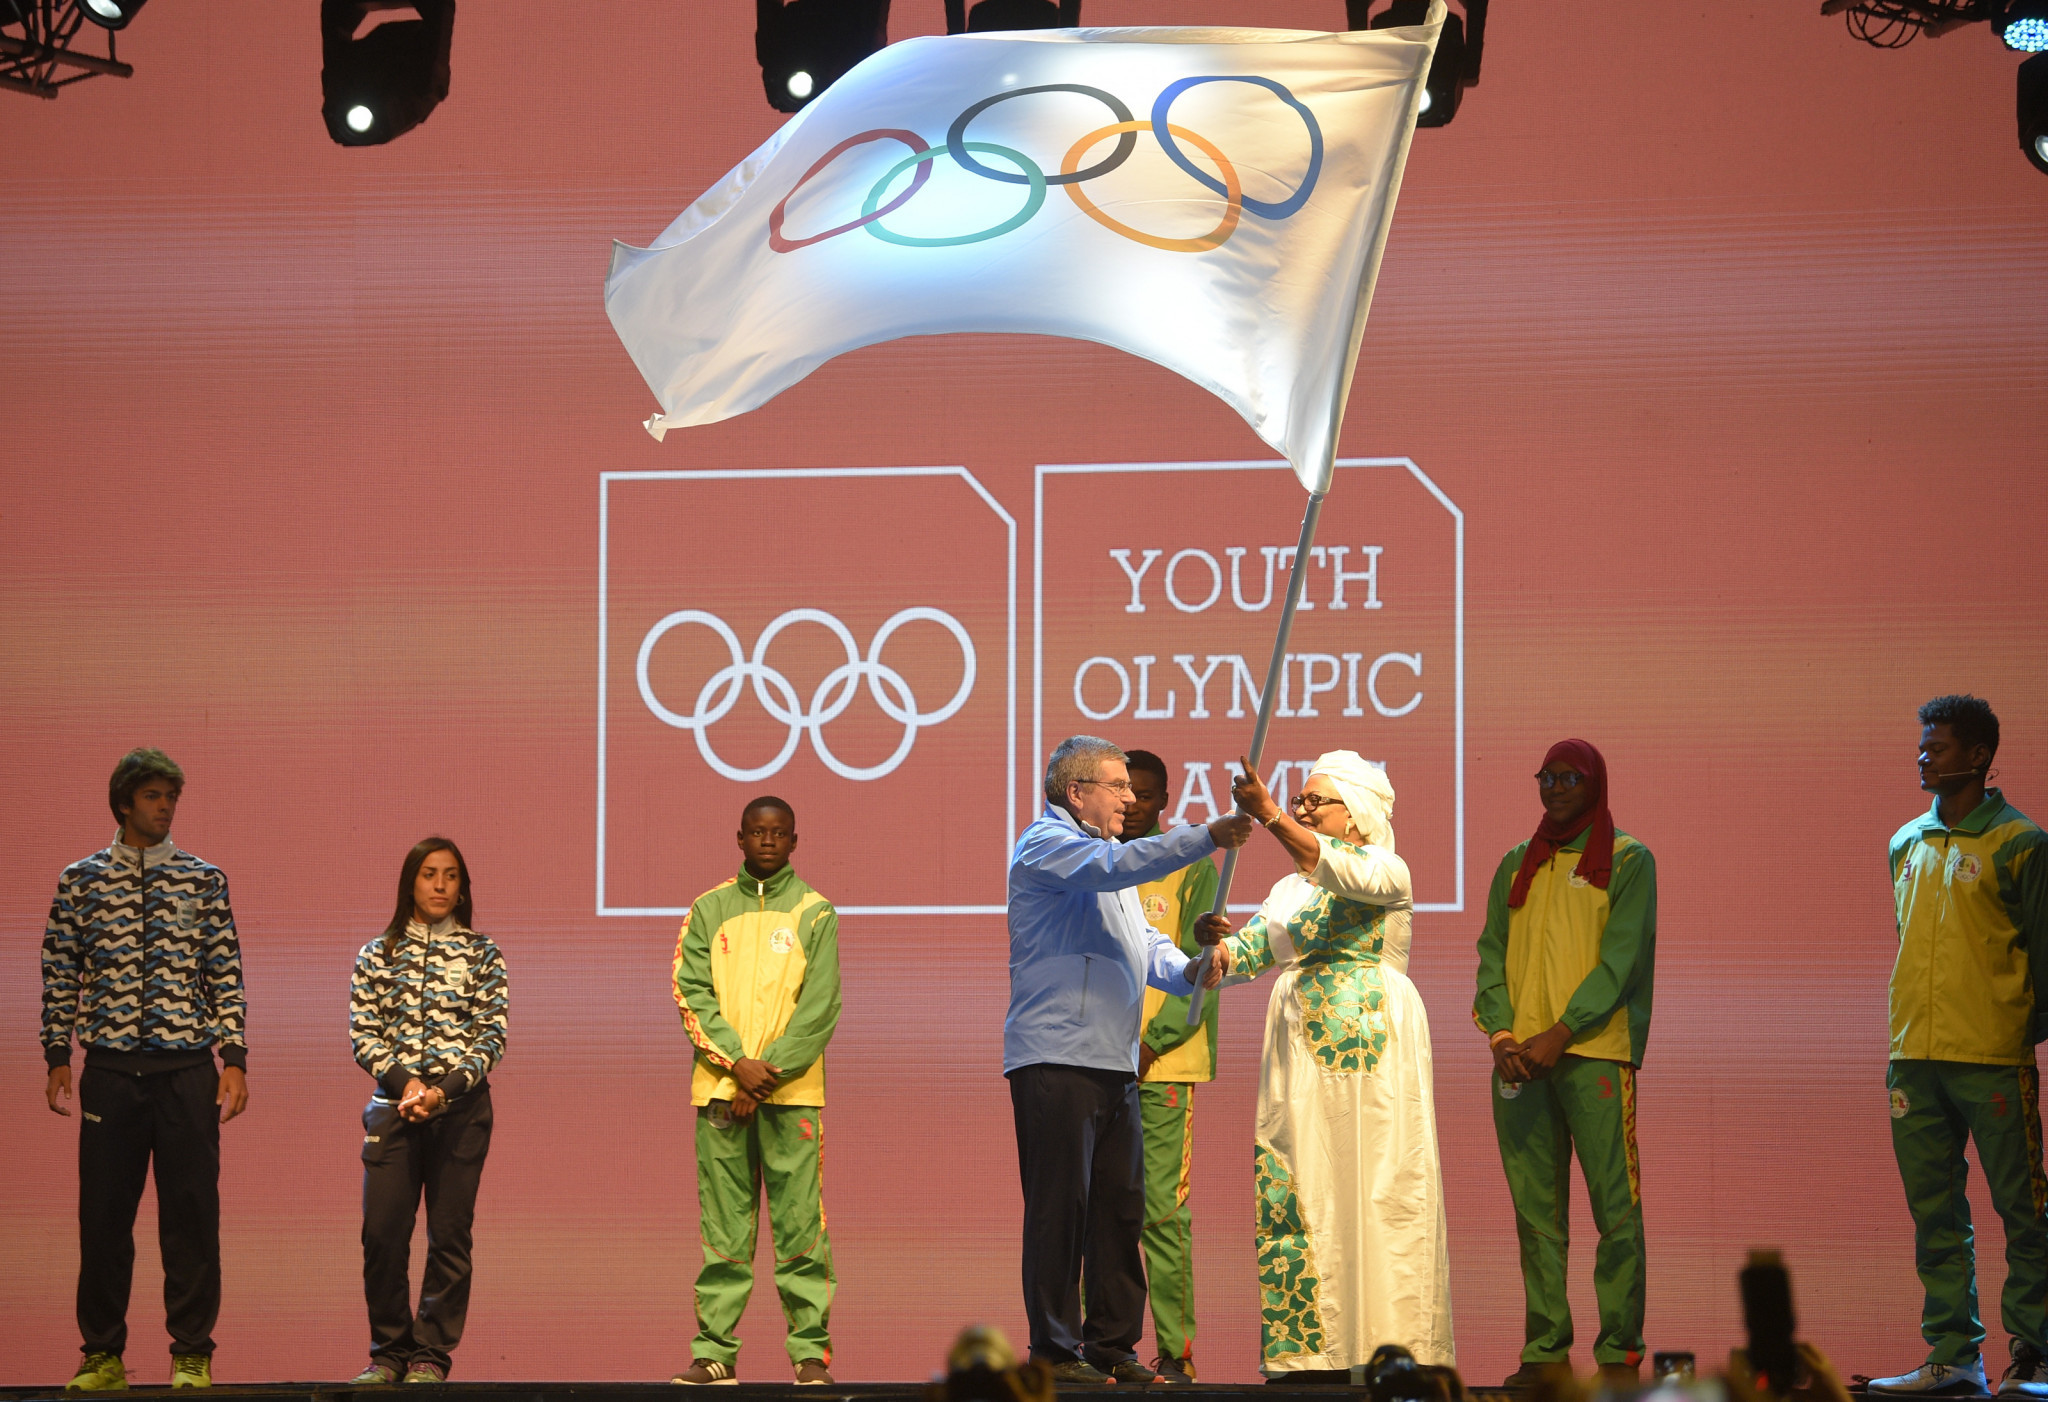 During the closing ceremony, International Olympic Committee President Thomas Bach transfers the flag to a representative of Senegal, who will host the next Youth Olympic Games in 2022 ©Getty Images